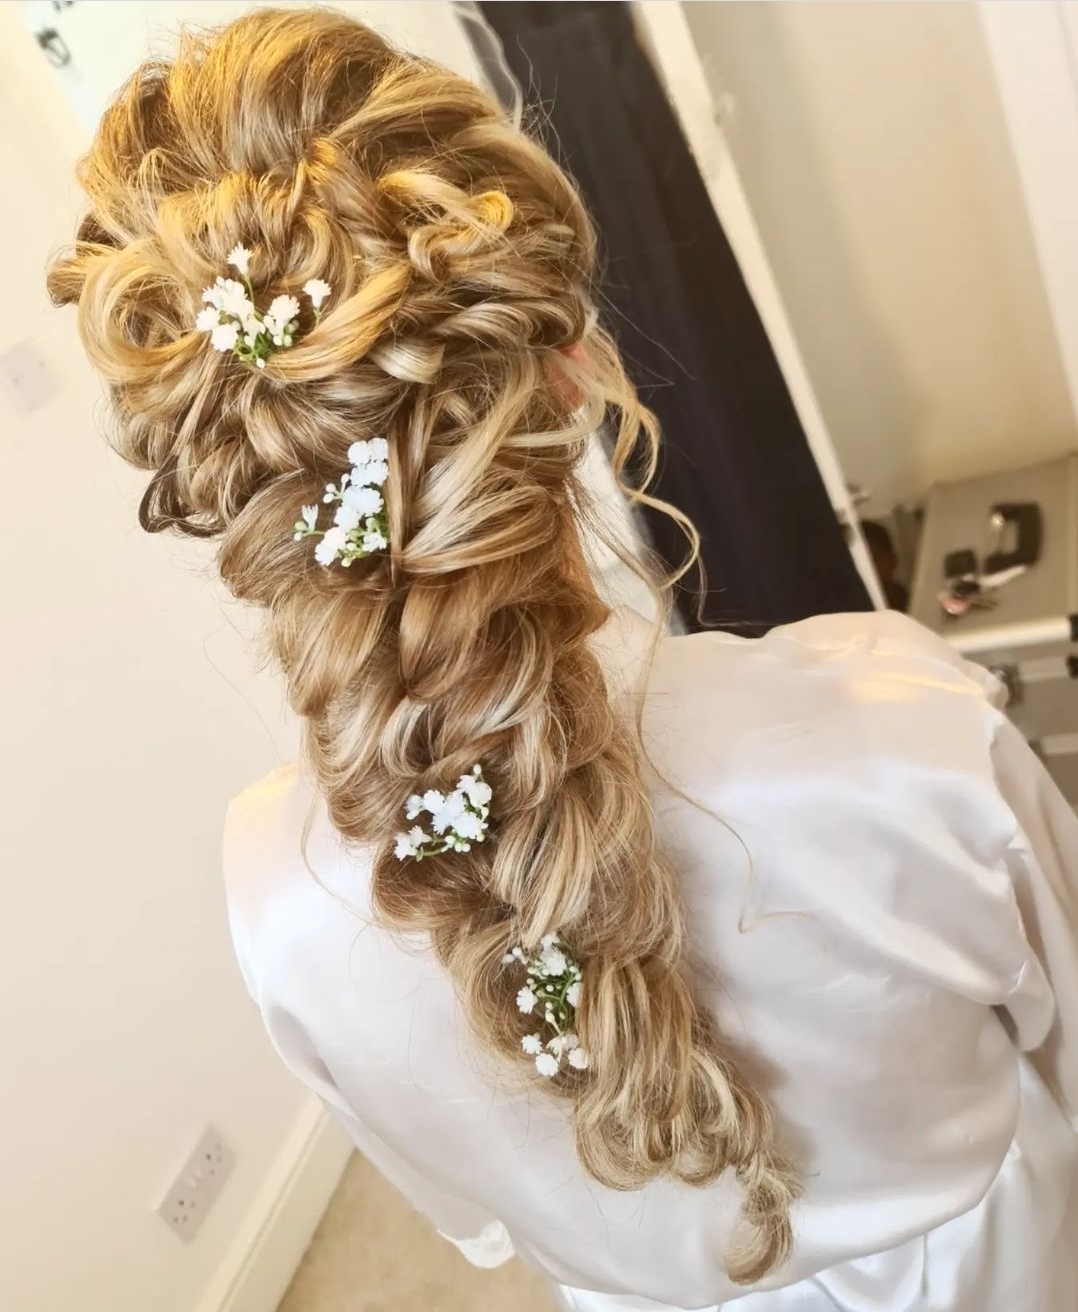 The team specialises in bridal hair